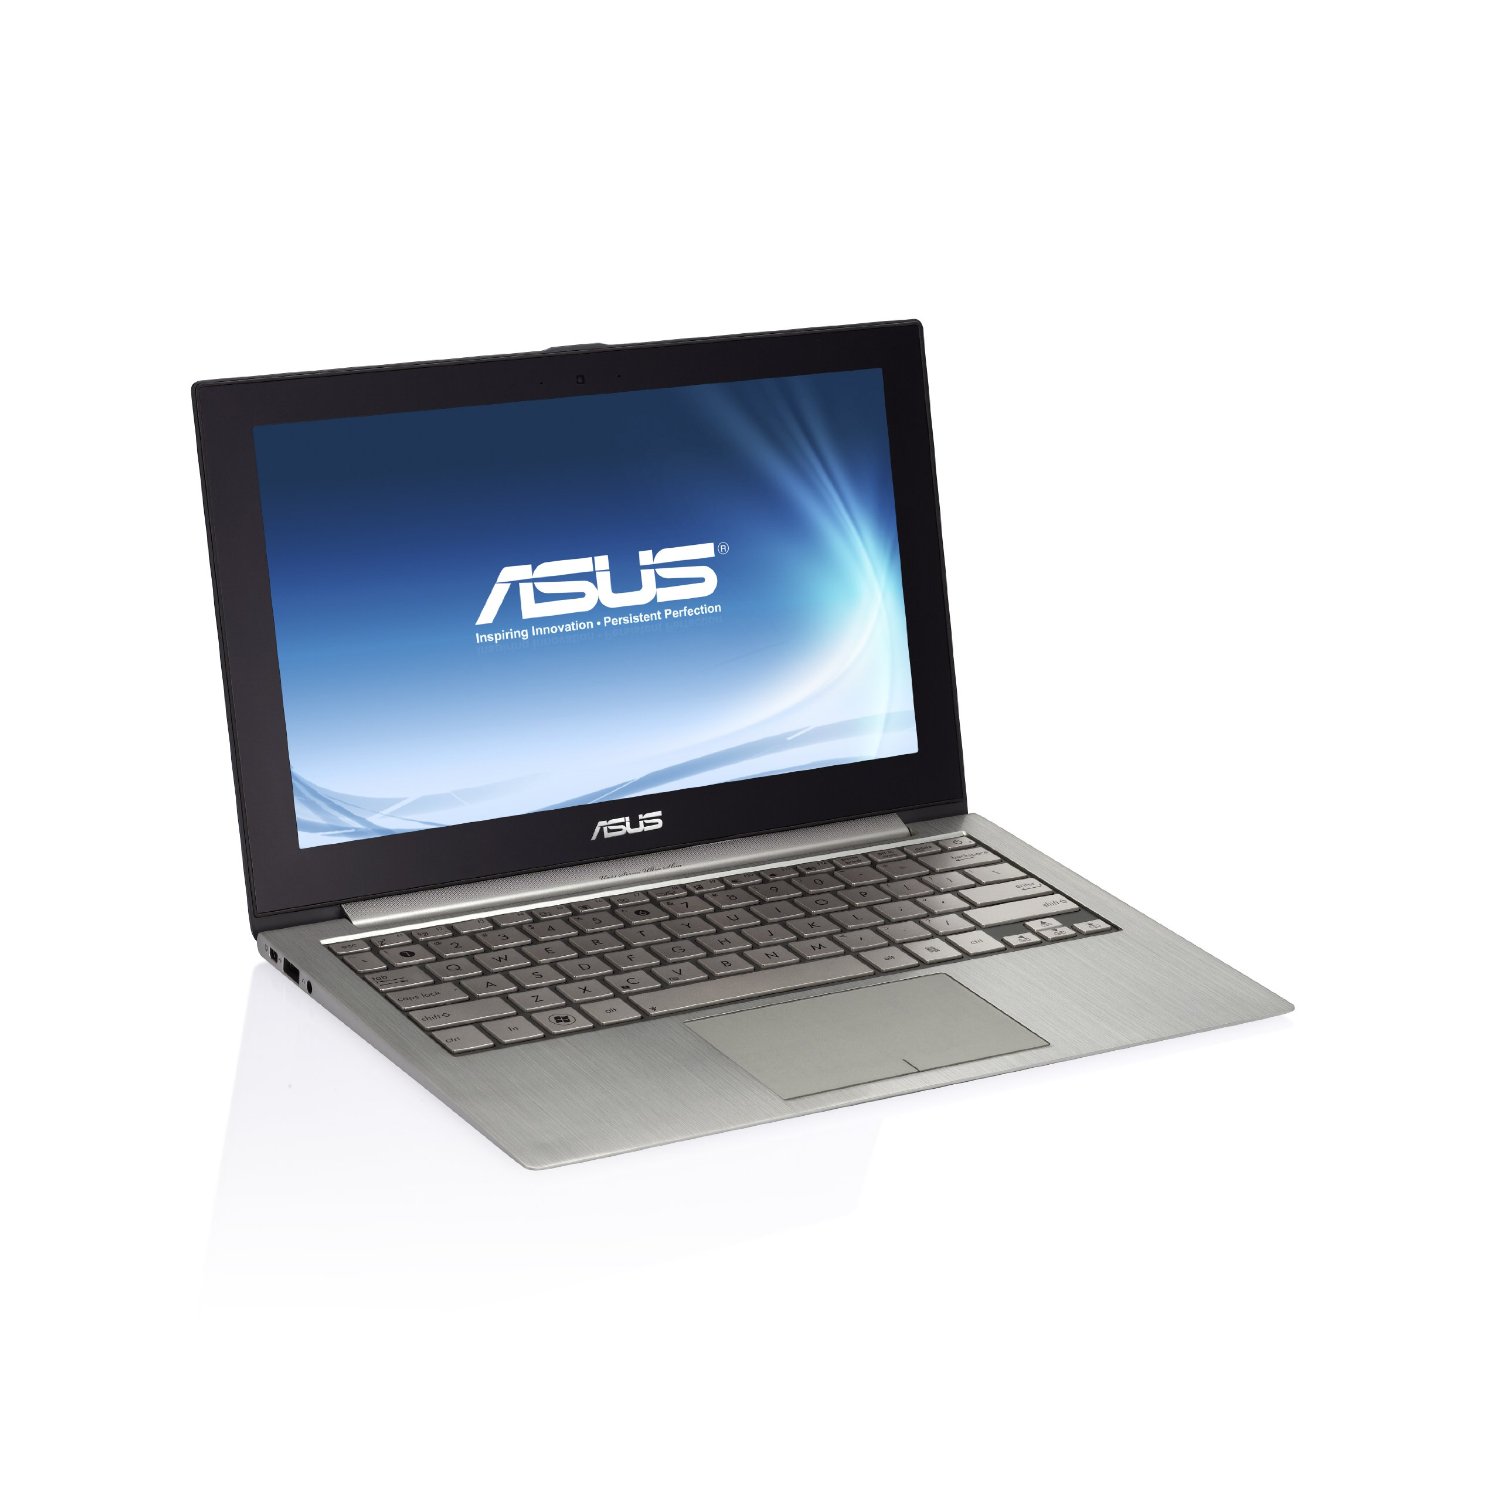 http://thetechjournal.com/wp-content/uploads/images/1112/1325329657-asus-zenbook-ux21edh71-116inch-thin-and-light-ultrabook-6.jpg